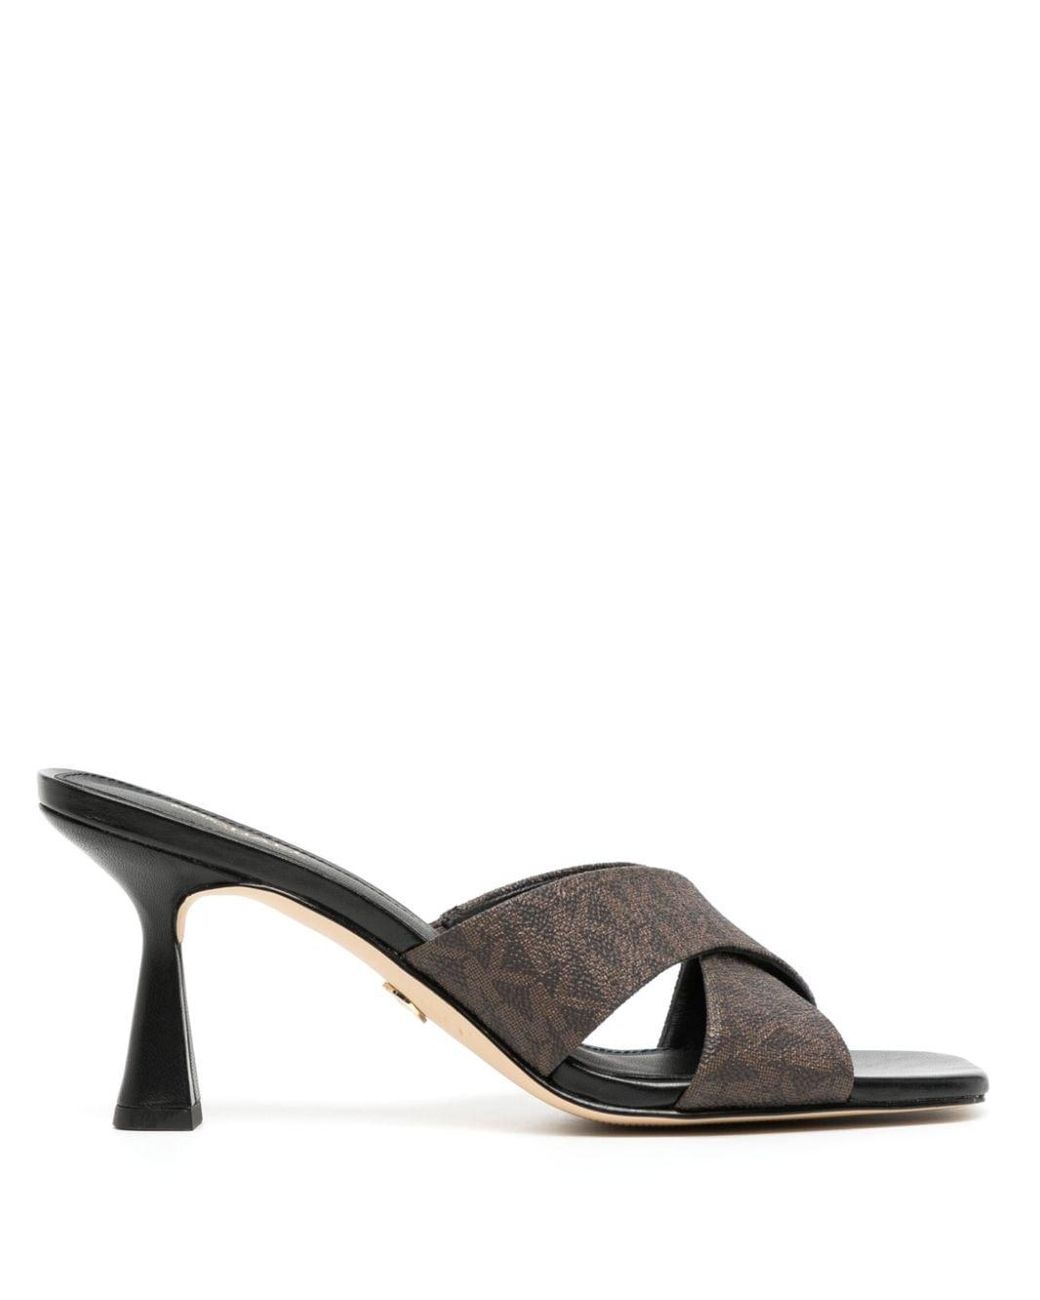 Michael Kors Clara 70mm Leather Mules in Brown | Lyst